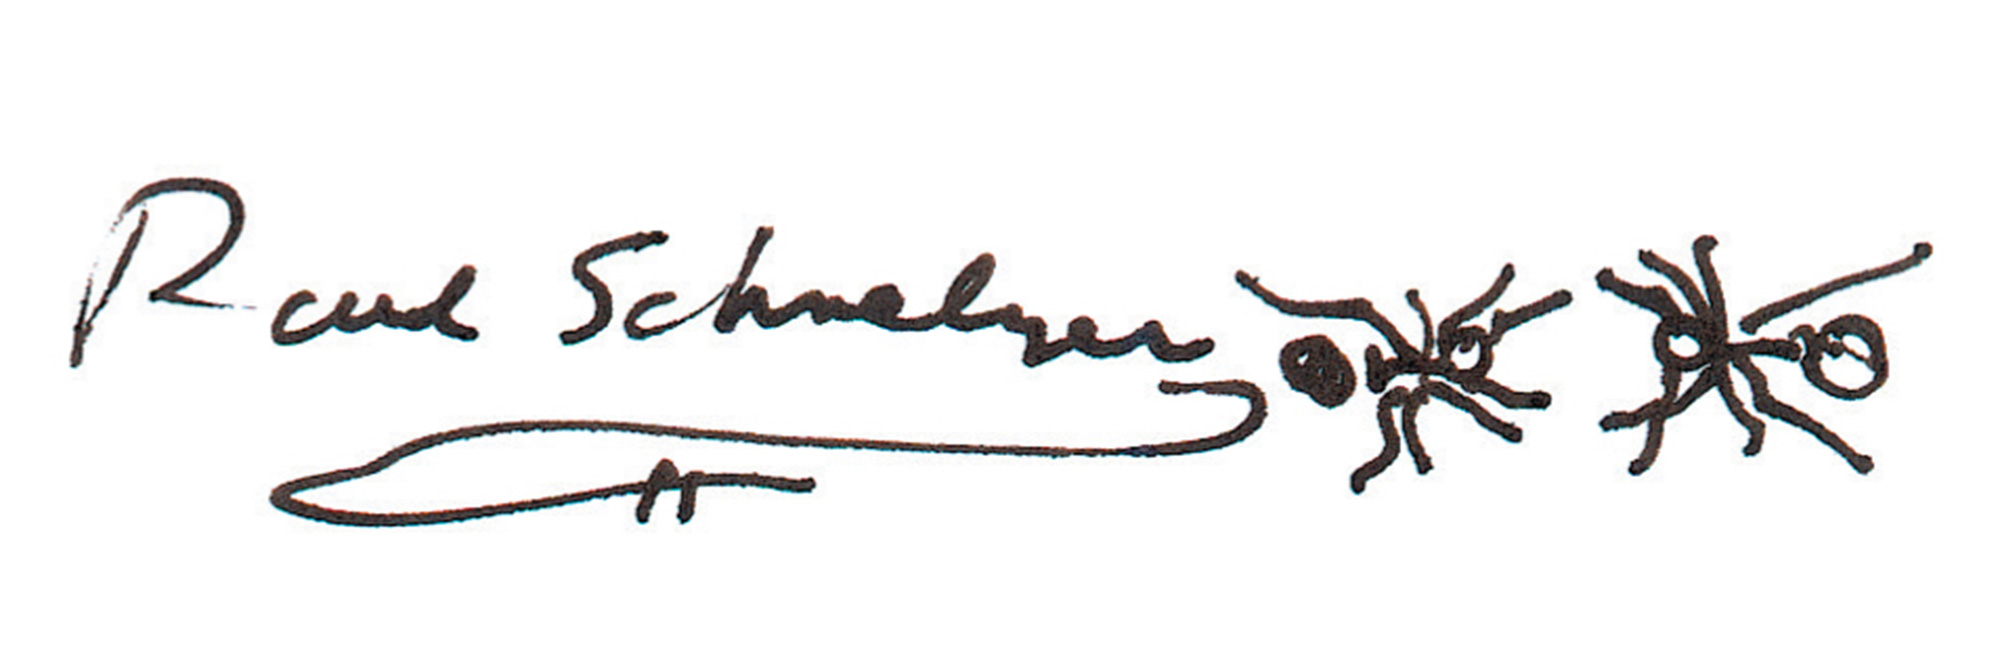 A photograph of Edward O. Wilson's written version of the name Paul Schmelzer.